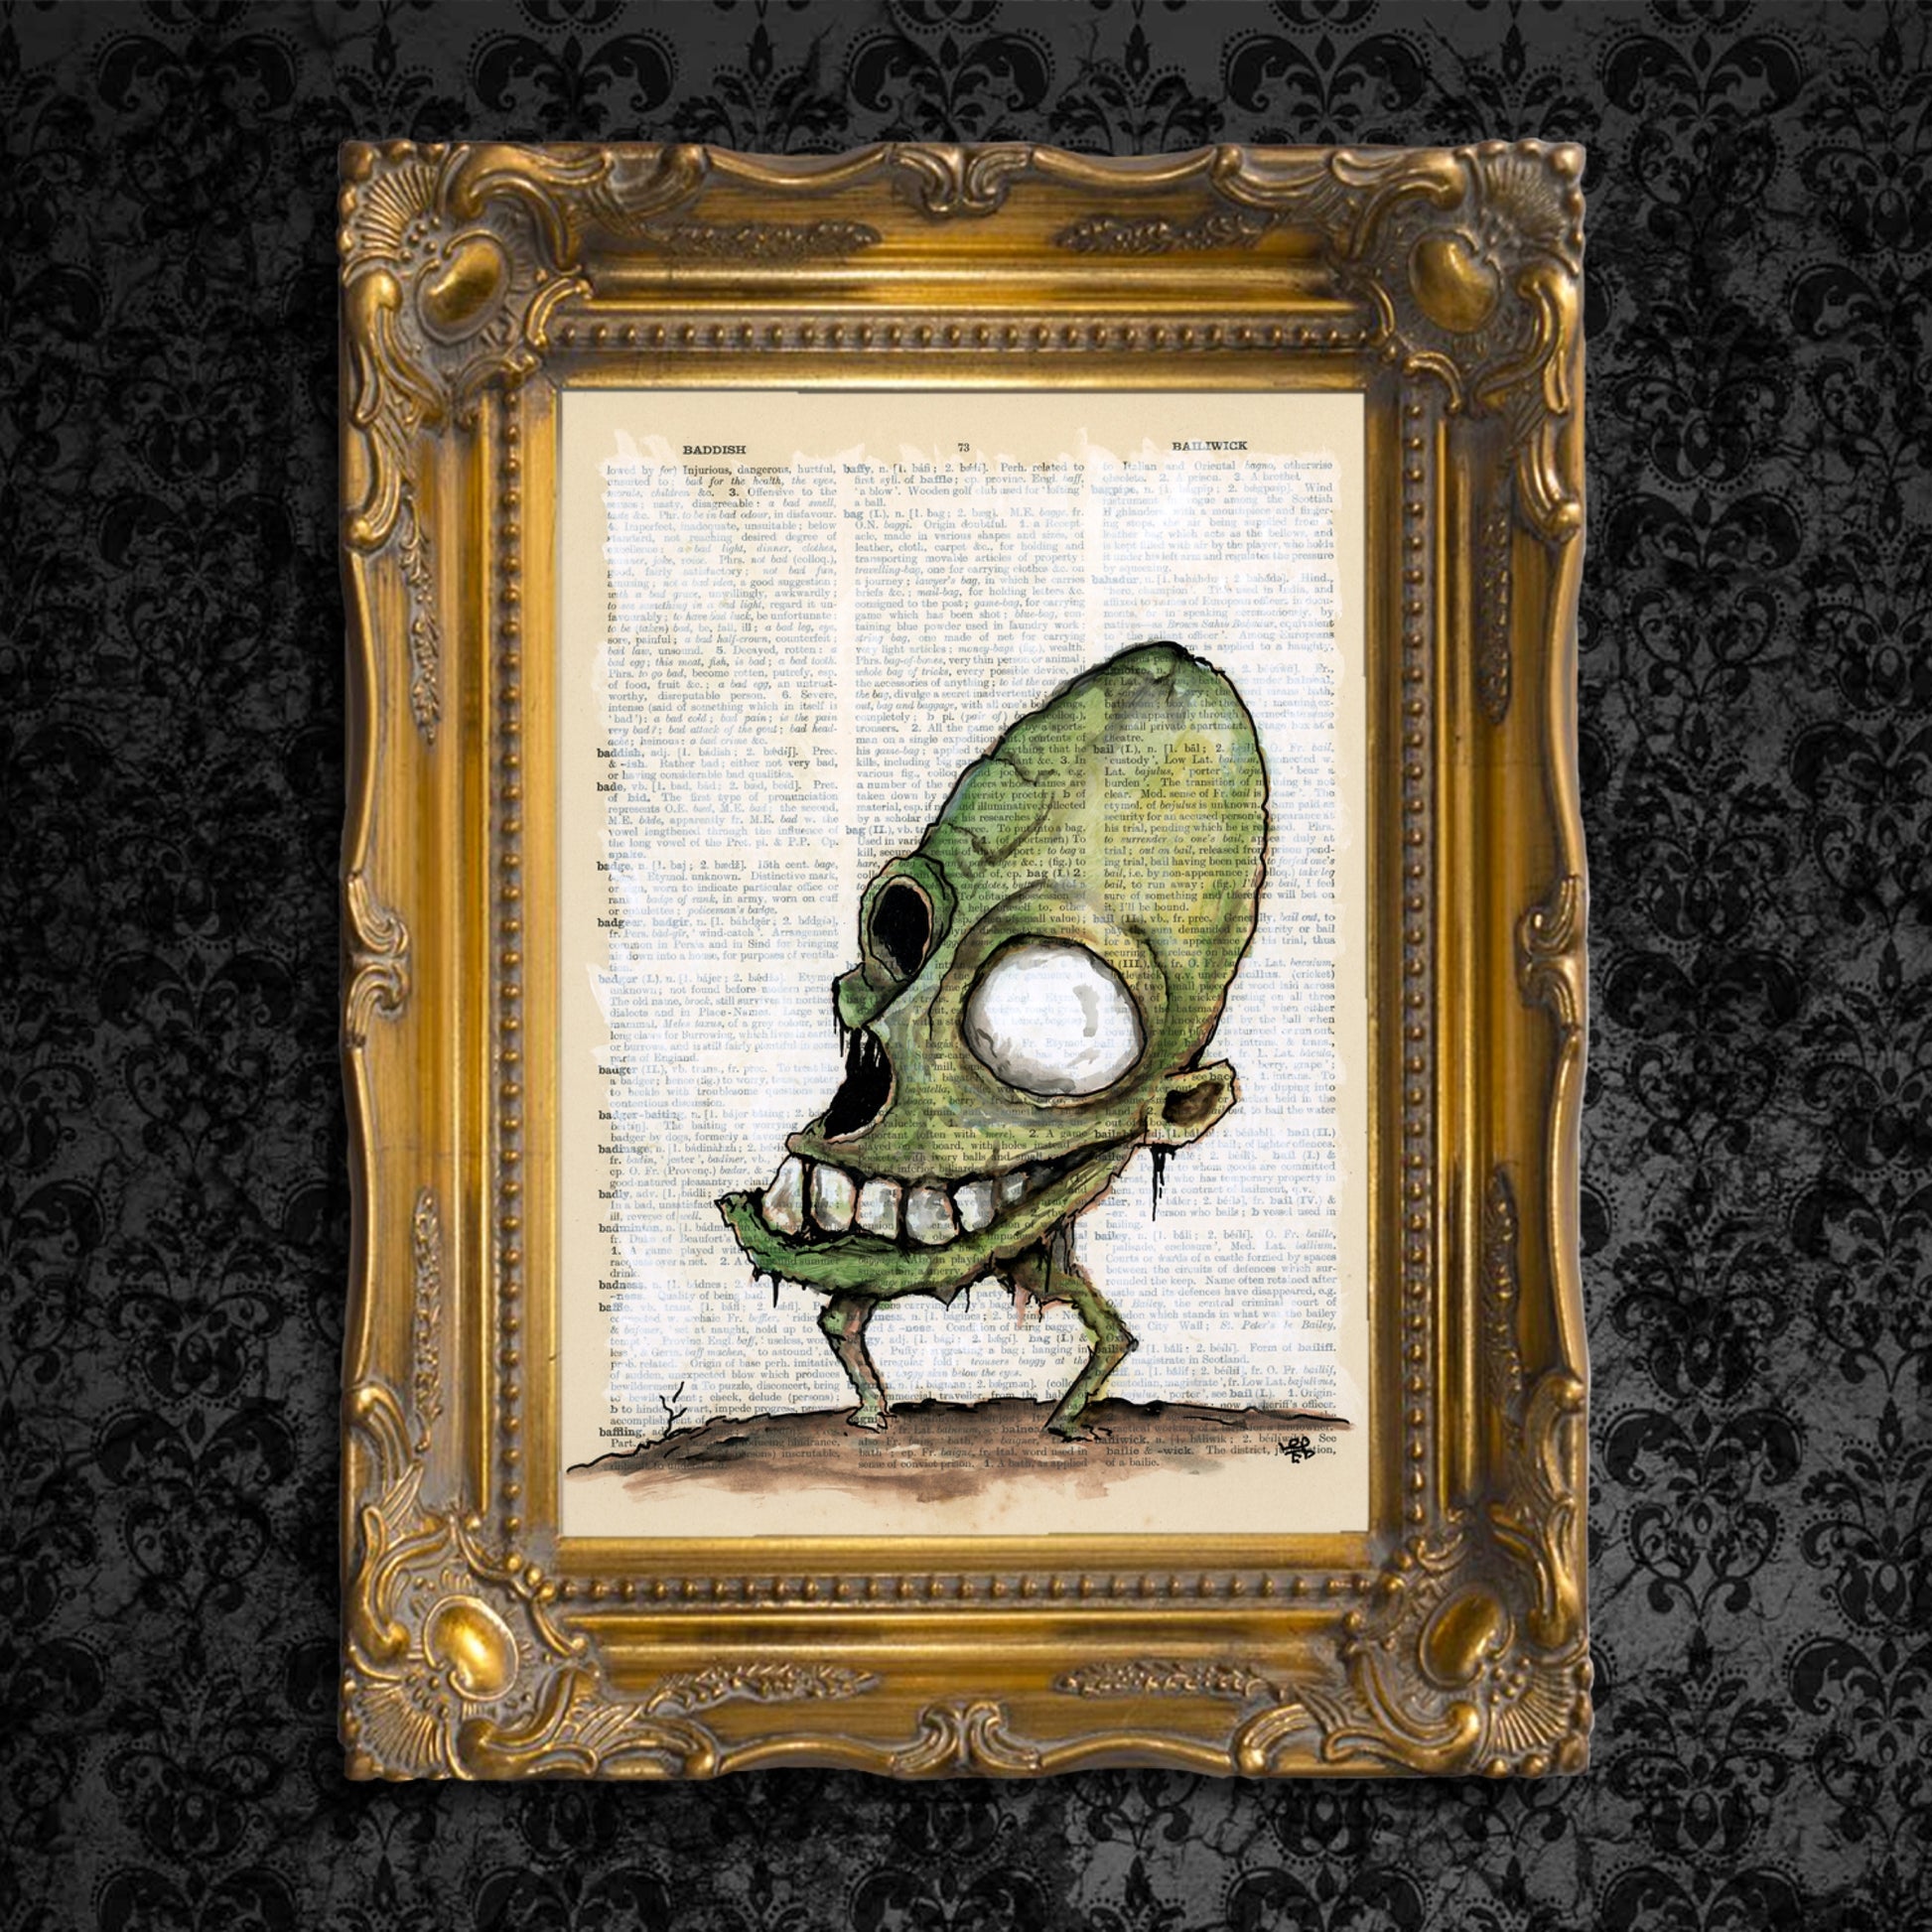 "Whimsical painting: Guacamole Monster emerges from vintage paper."